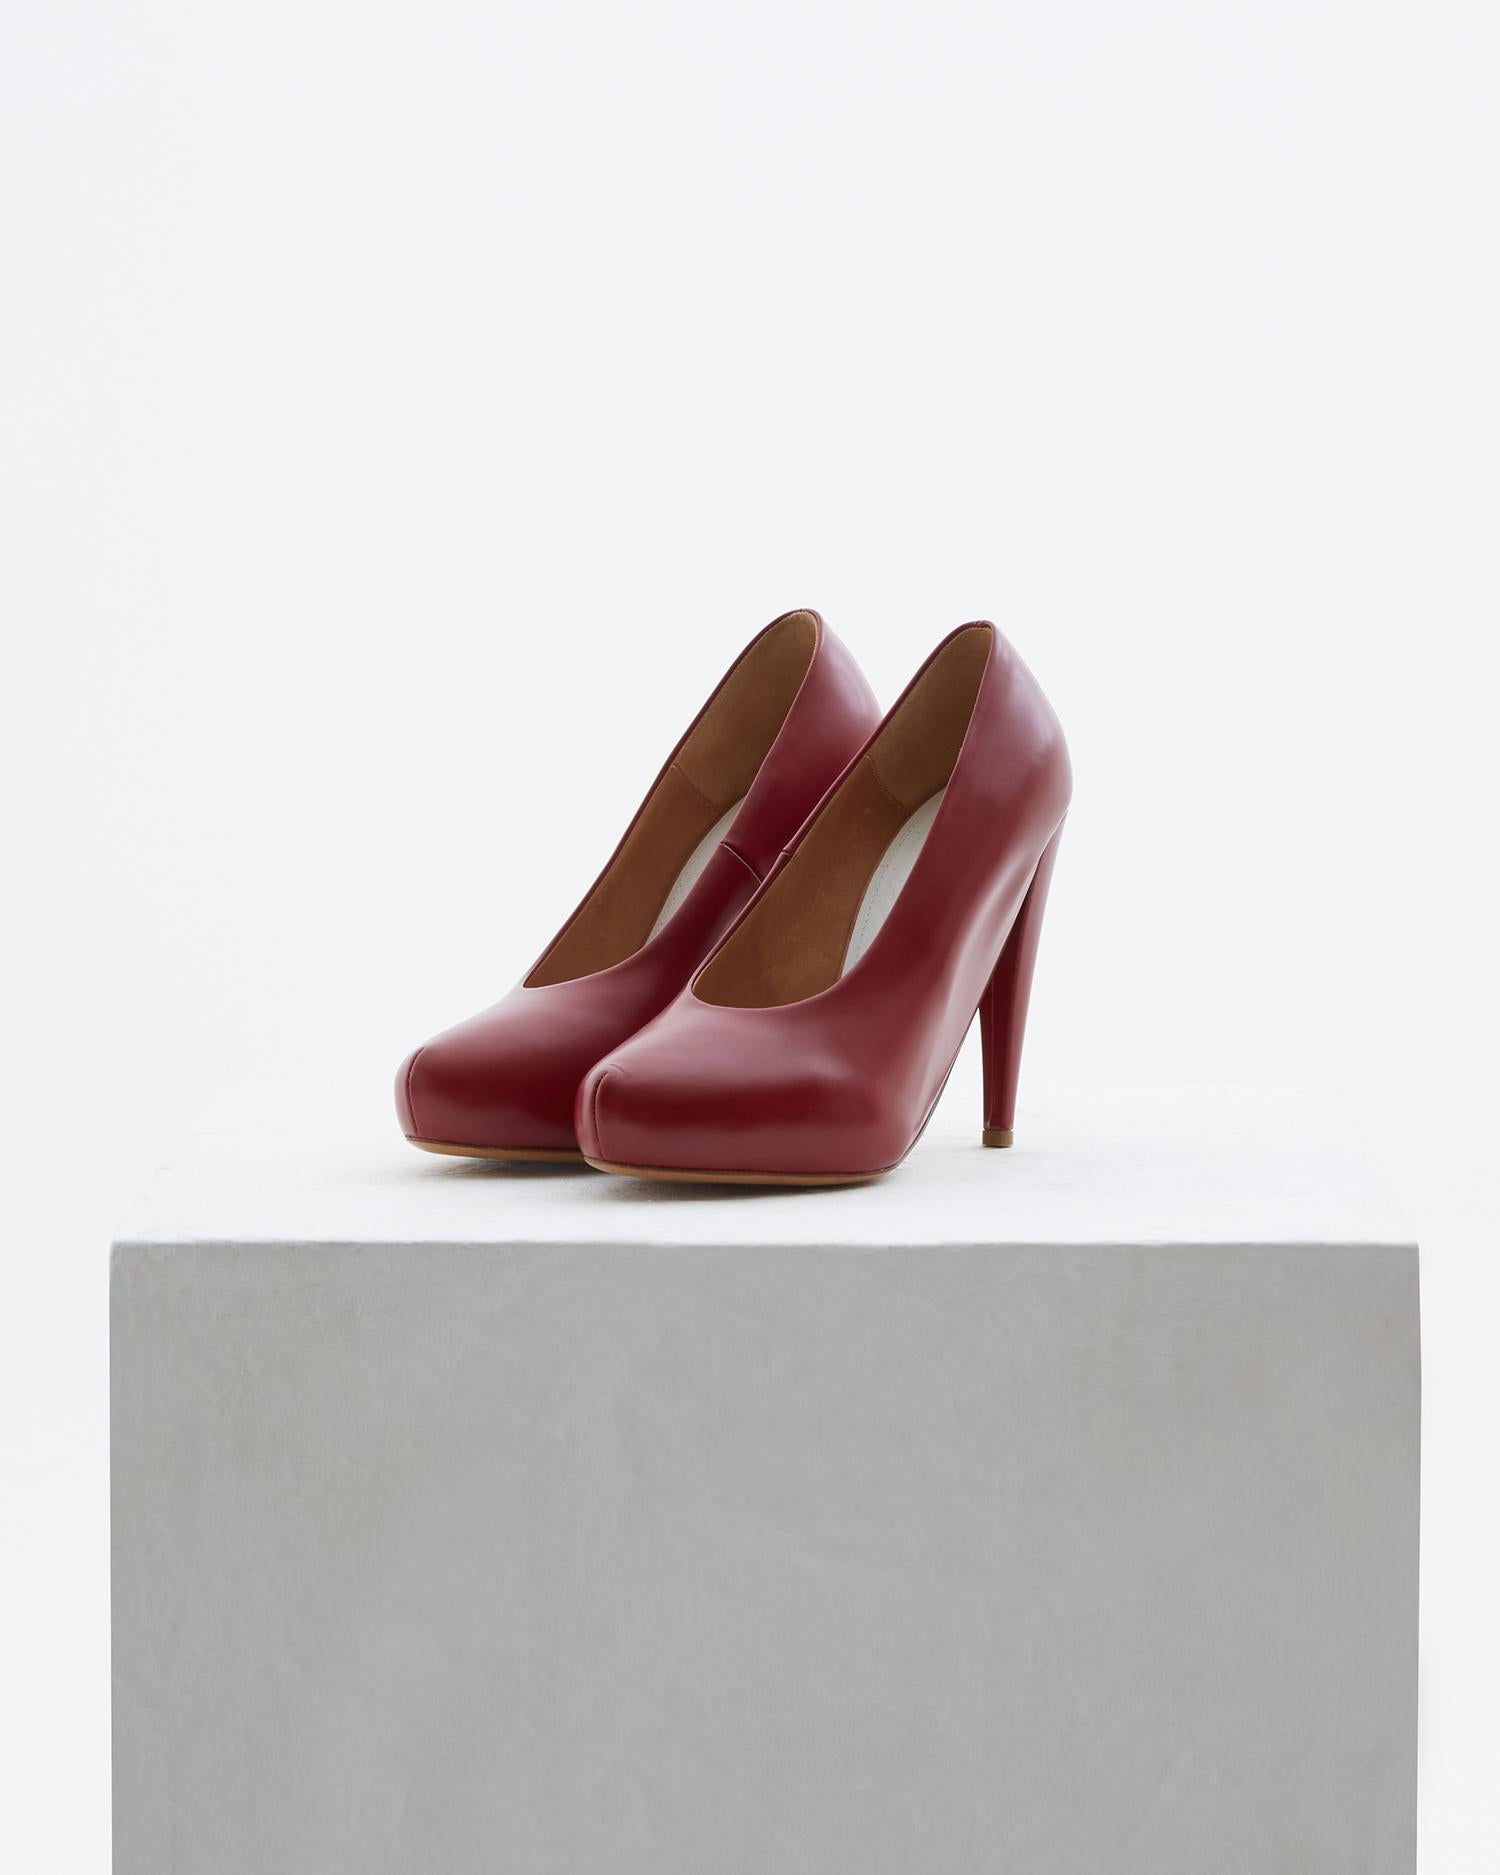 - Red leather pumps
- Sold by Skof.Archive 
- Solid unified form with a curved bottom  line
- Fall Winter 2010
- Without box

Size
38 1/2

Measurements
Outsole length 19 cm / 7”
Outsole width 7,5 cm / 3”
Heel size 12 cm / 4”

Composition
100% Leather